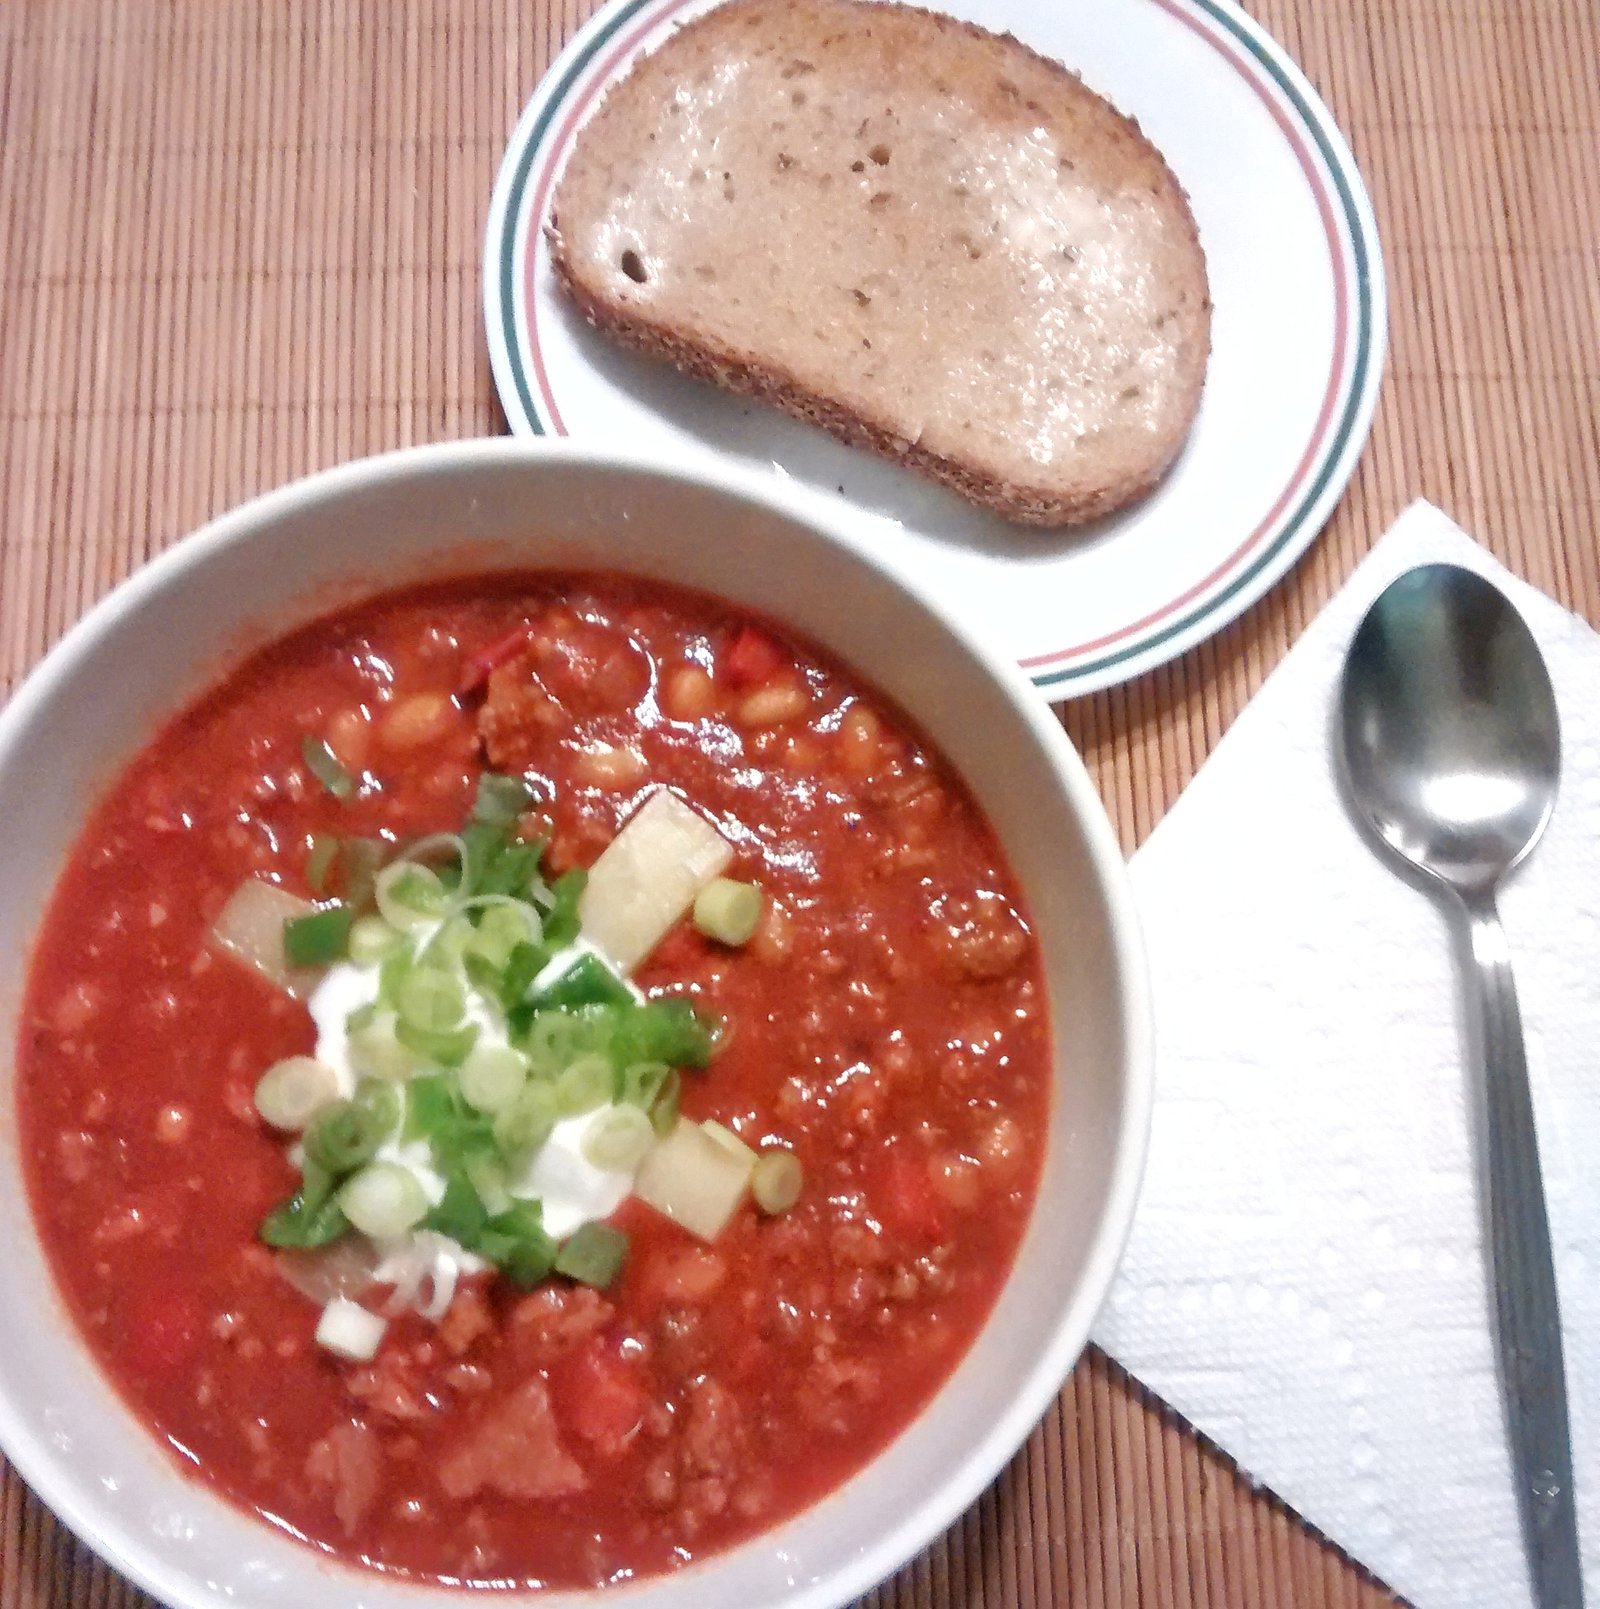 Making amazing #chili is just delicouls but so healthy! #homecooking #recipe #health #food